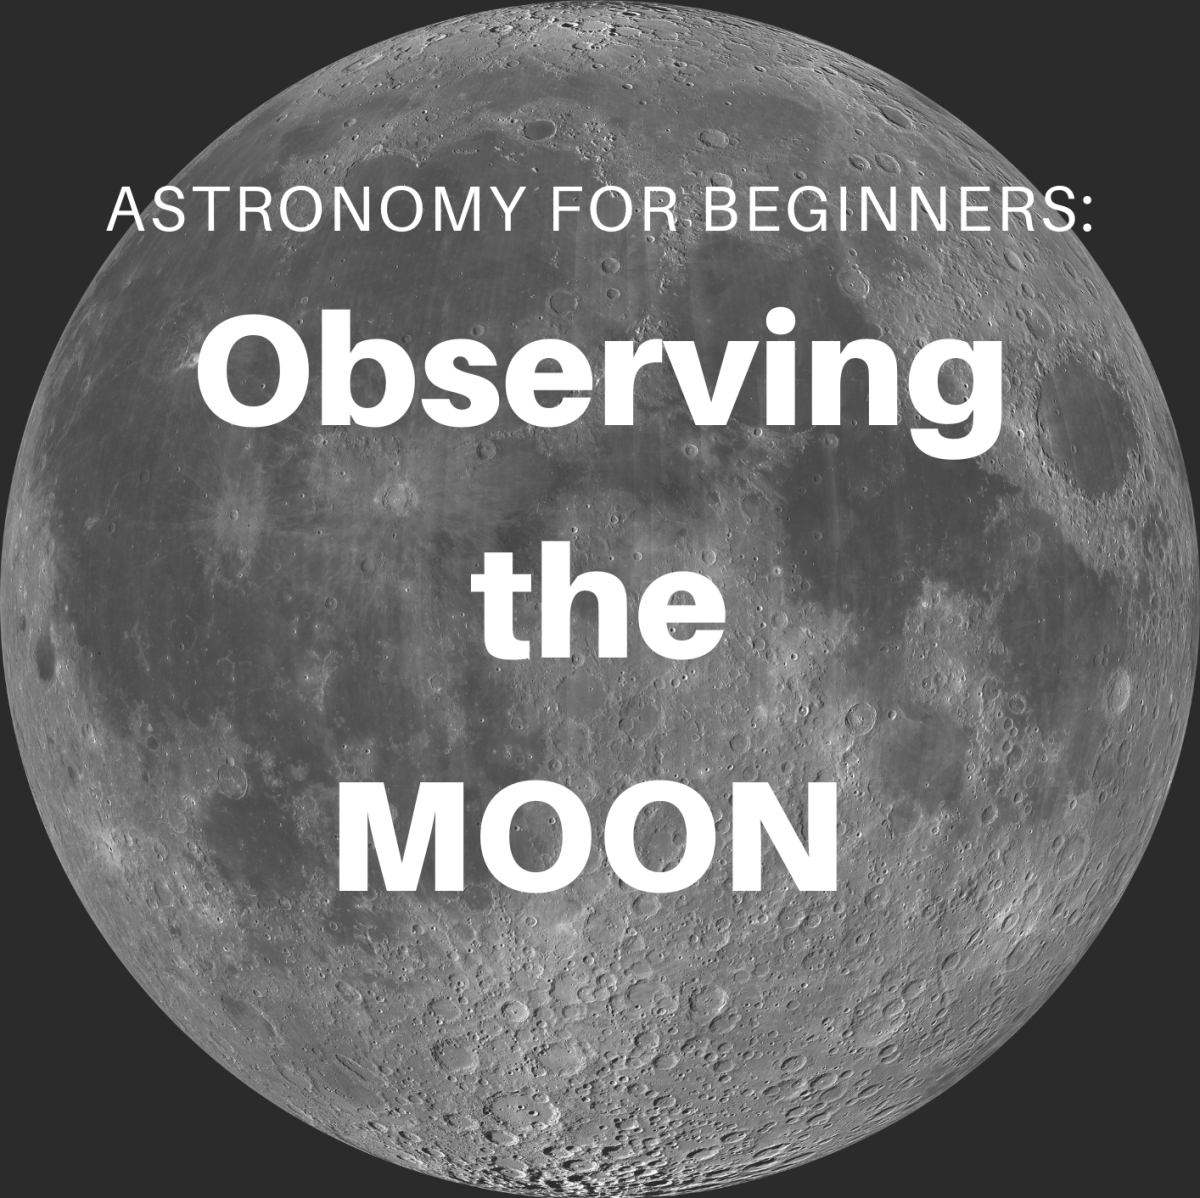 observing-the-moon